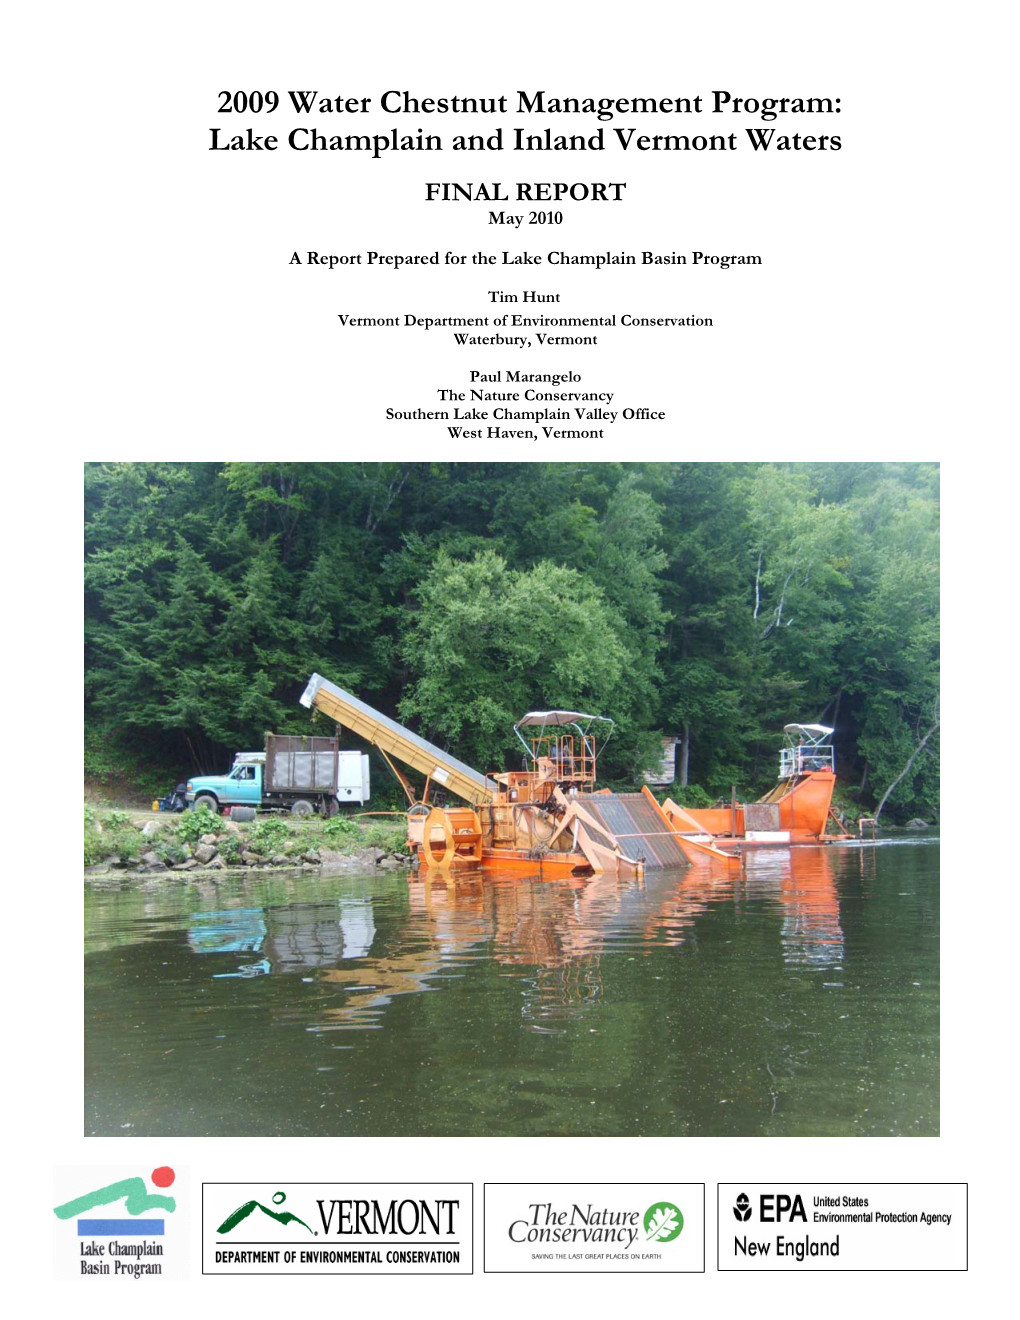 2009 Water Chestnut Management Program: Lake Champlain and Inland Vermont Waters